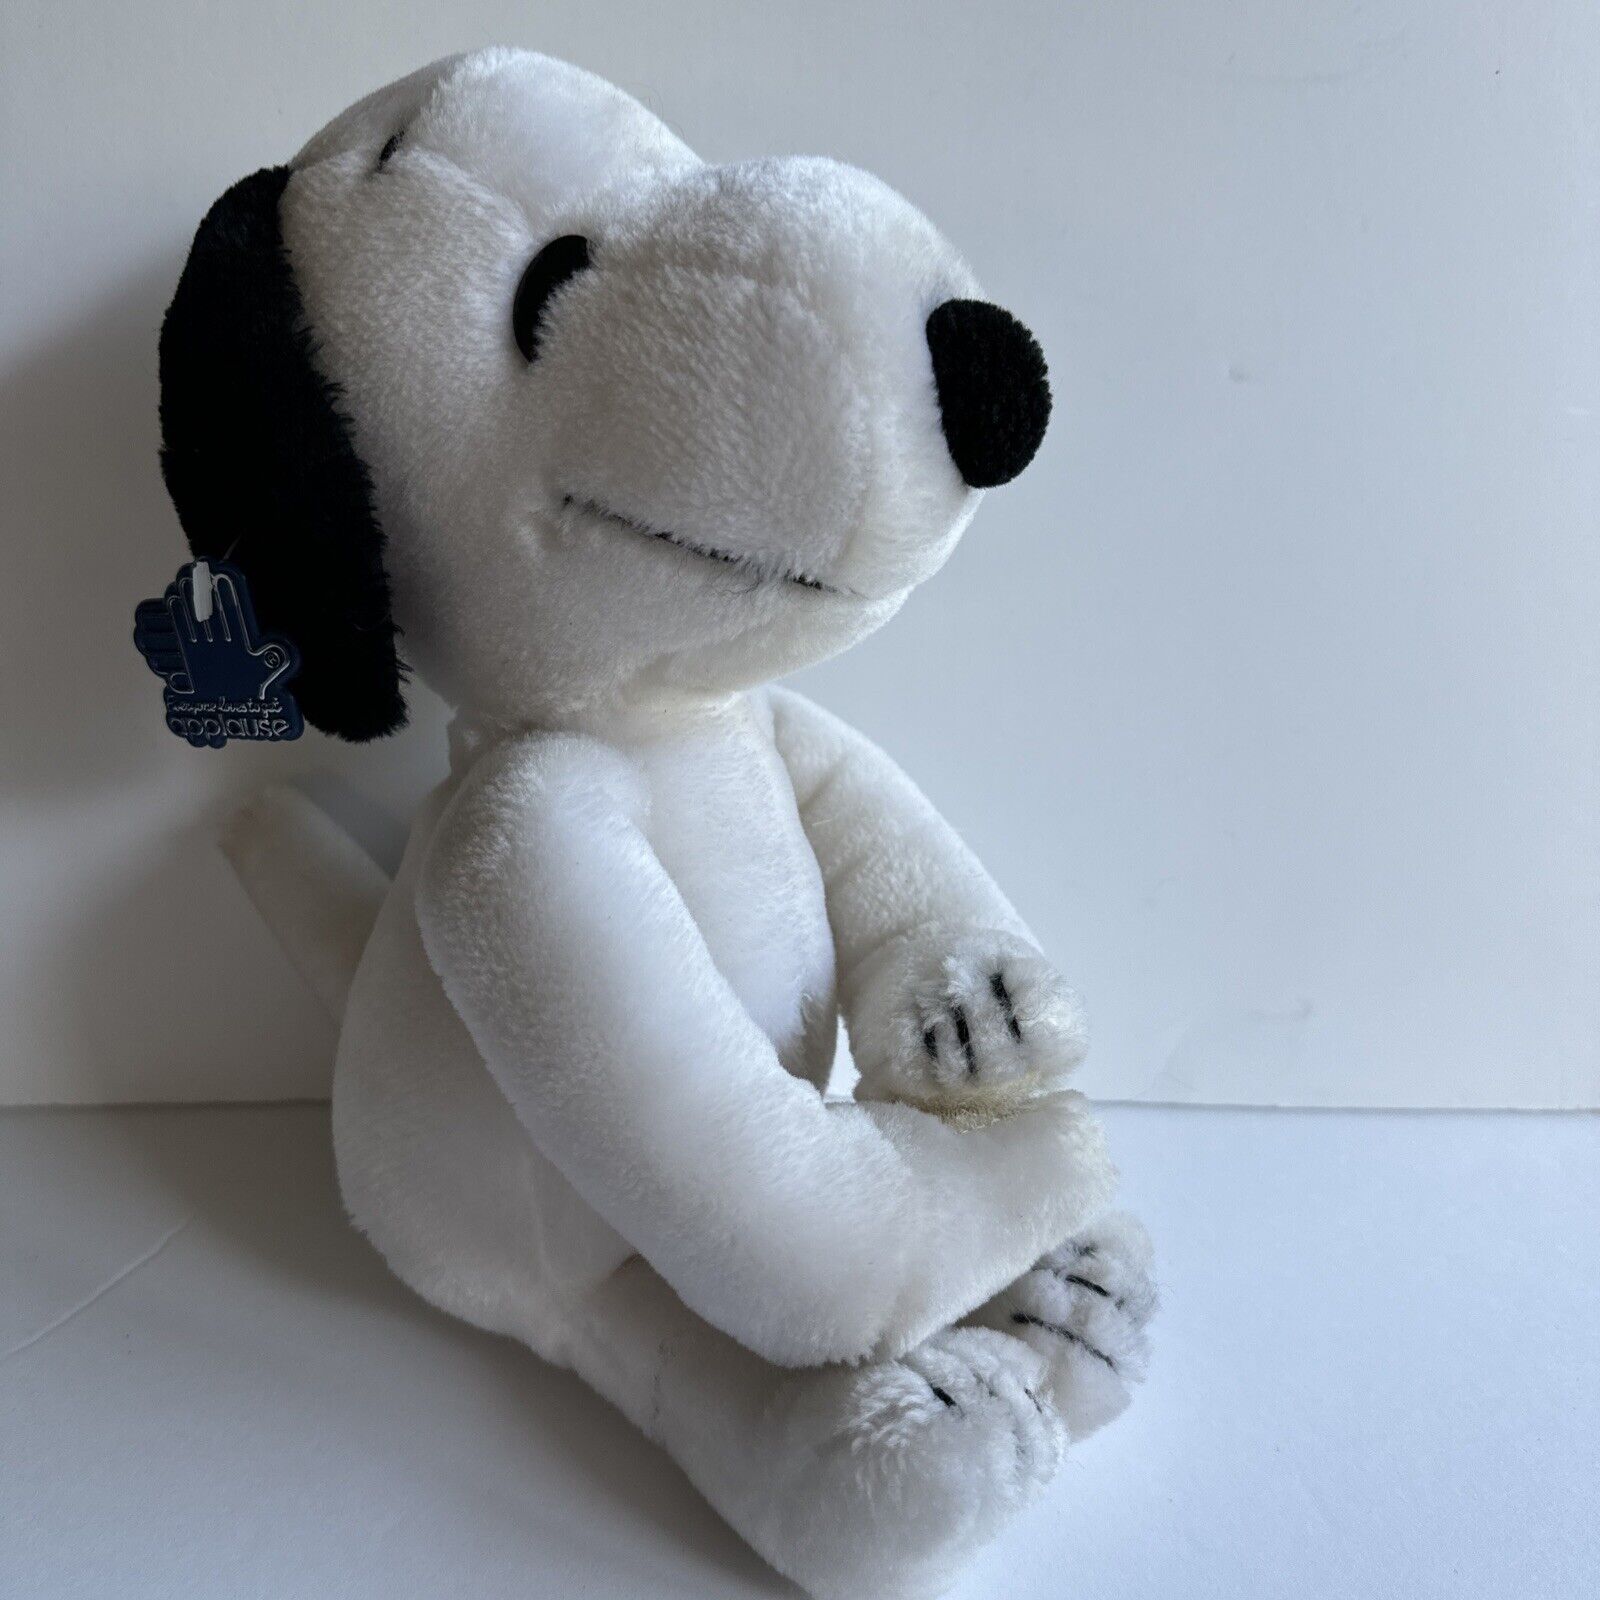 1968 Snoopy Plush by Applause with applause tag 12”